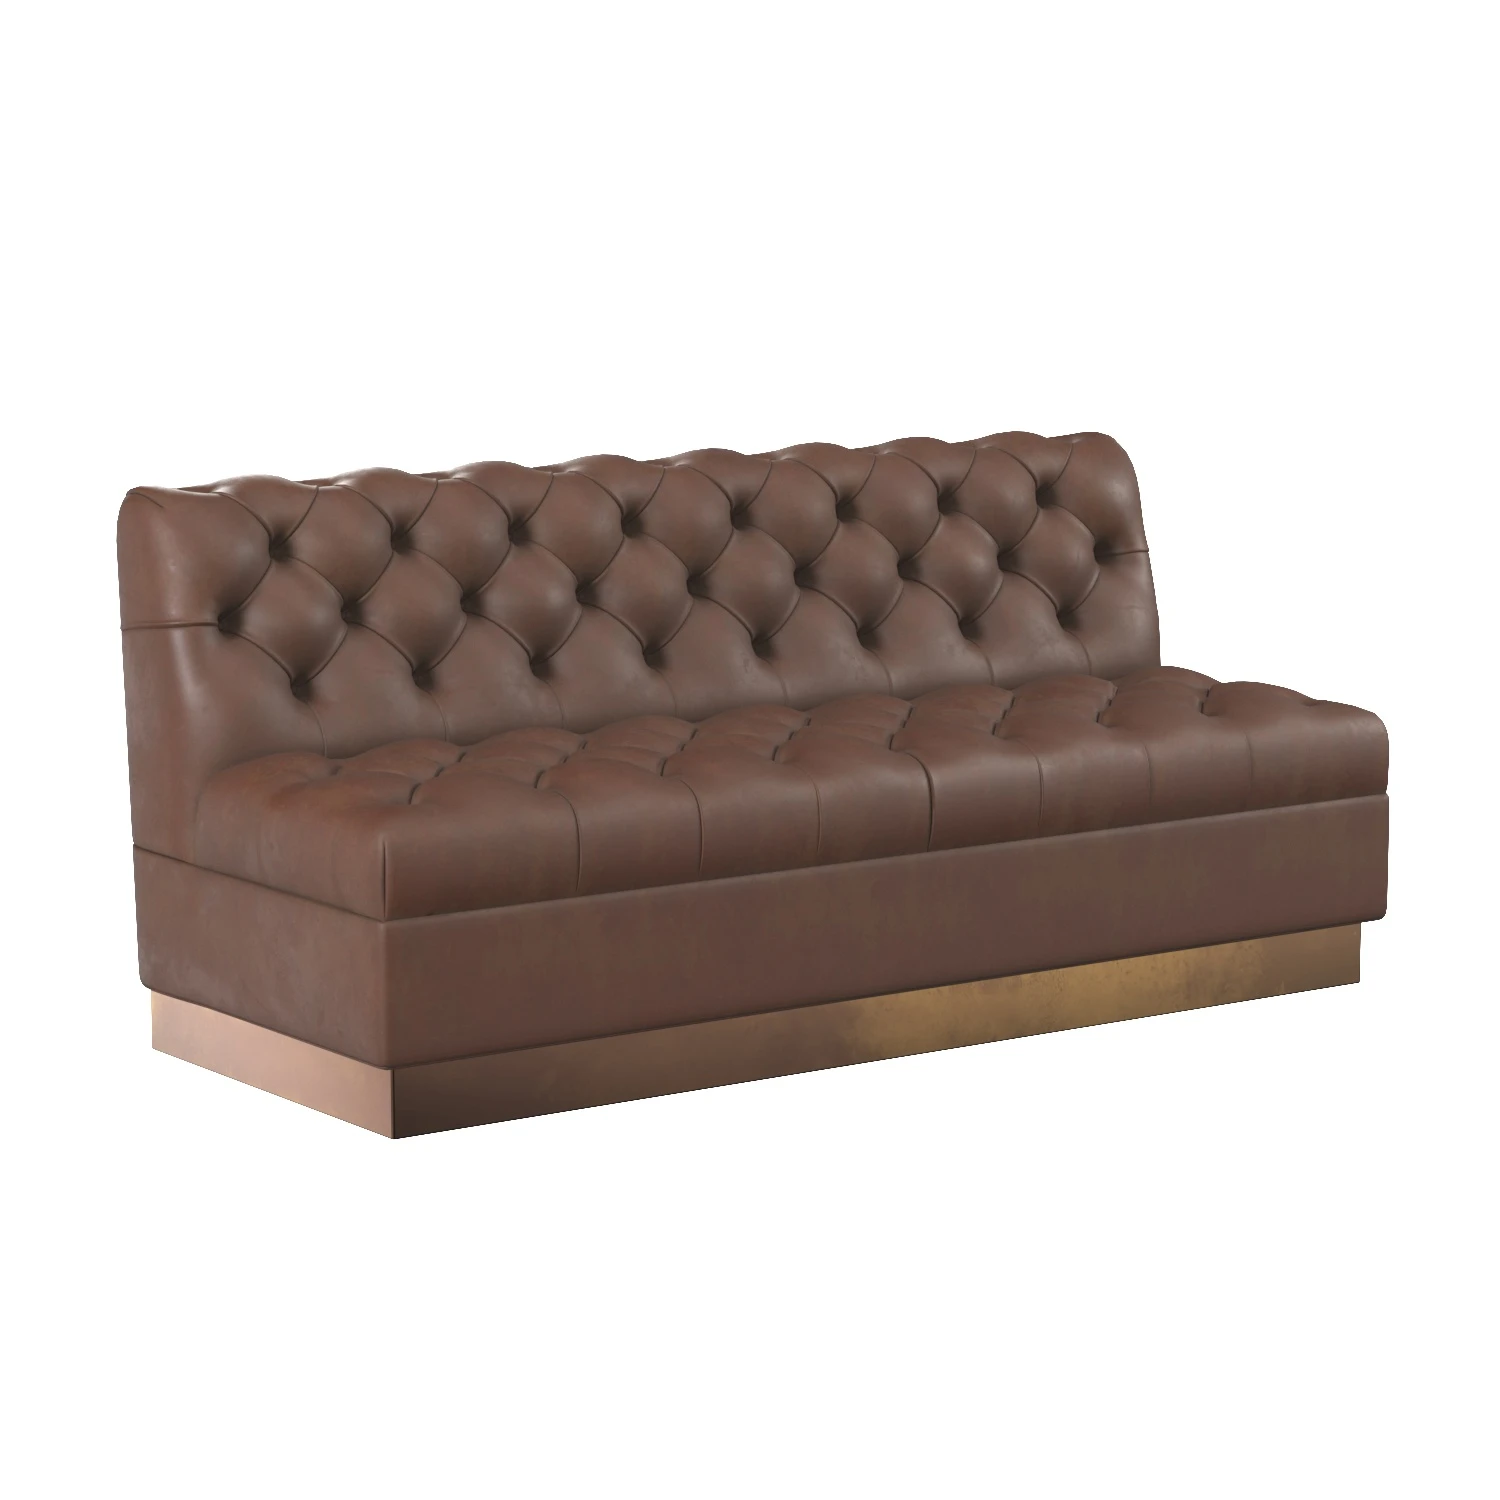 Silicon Valley Banquette PBR 3D Model_01